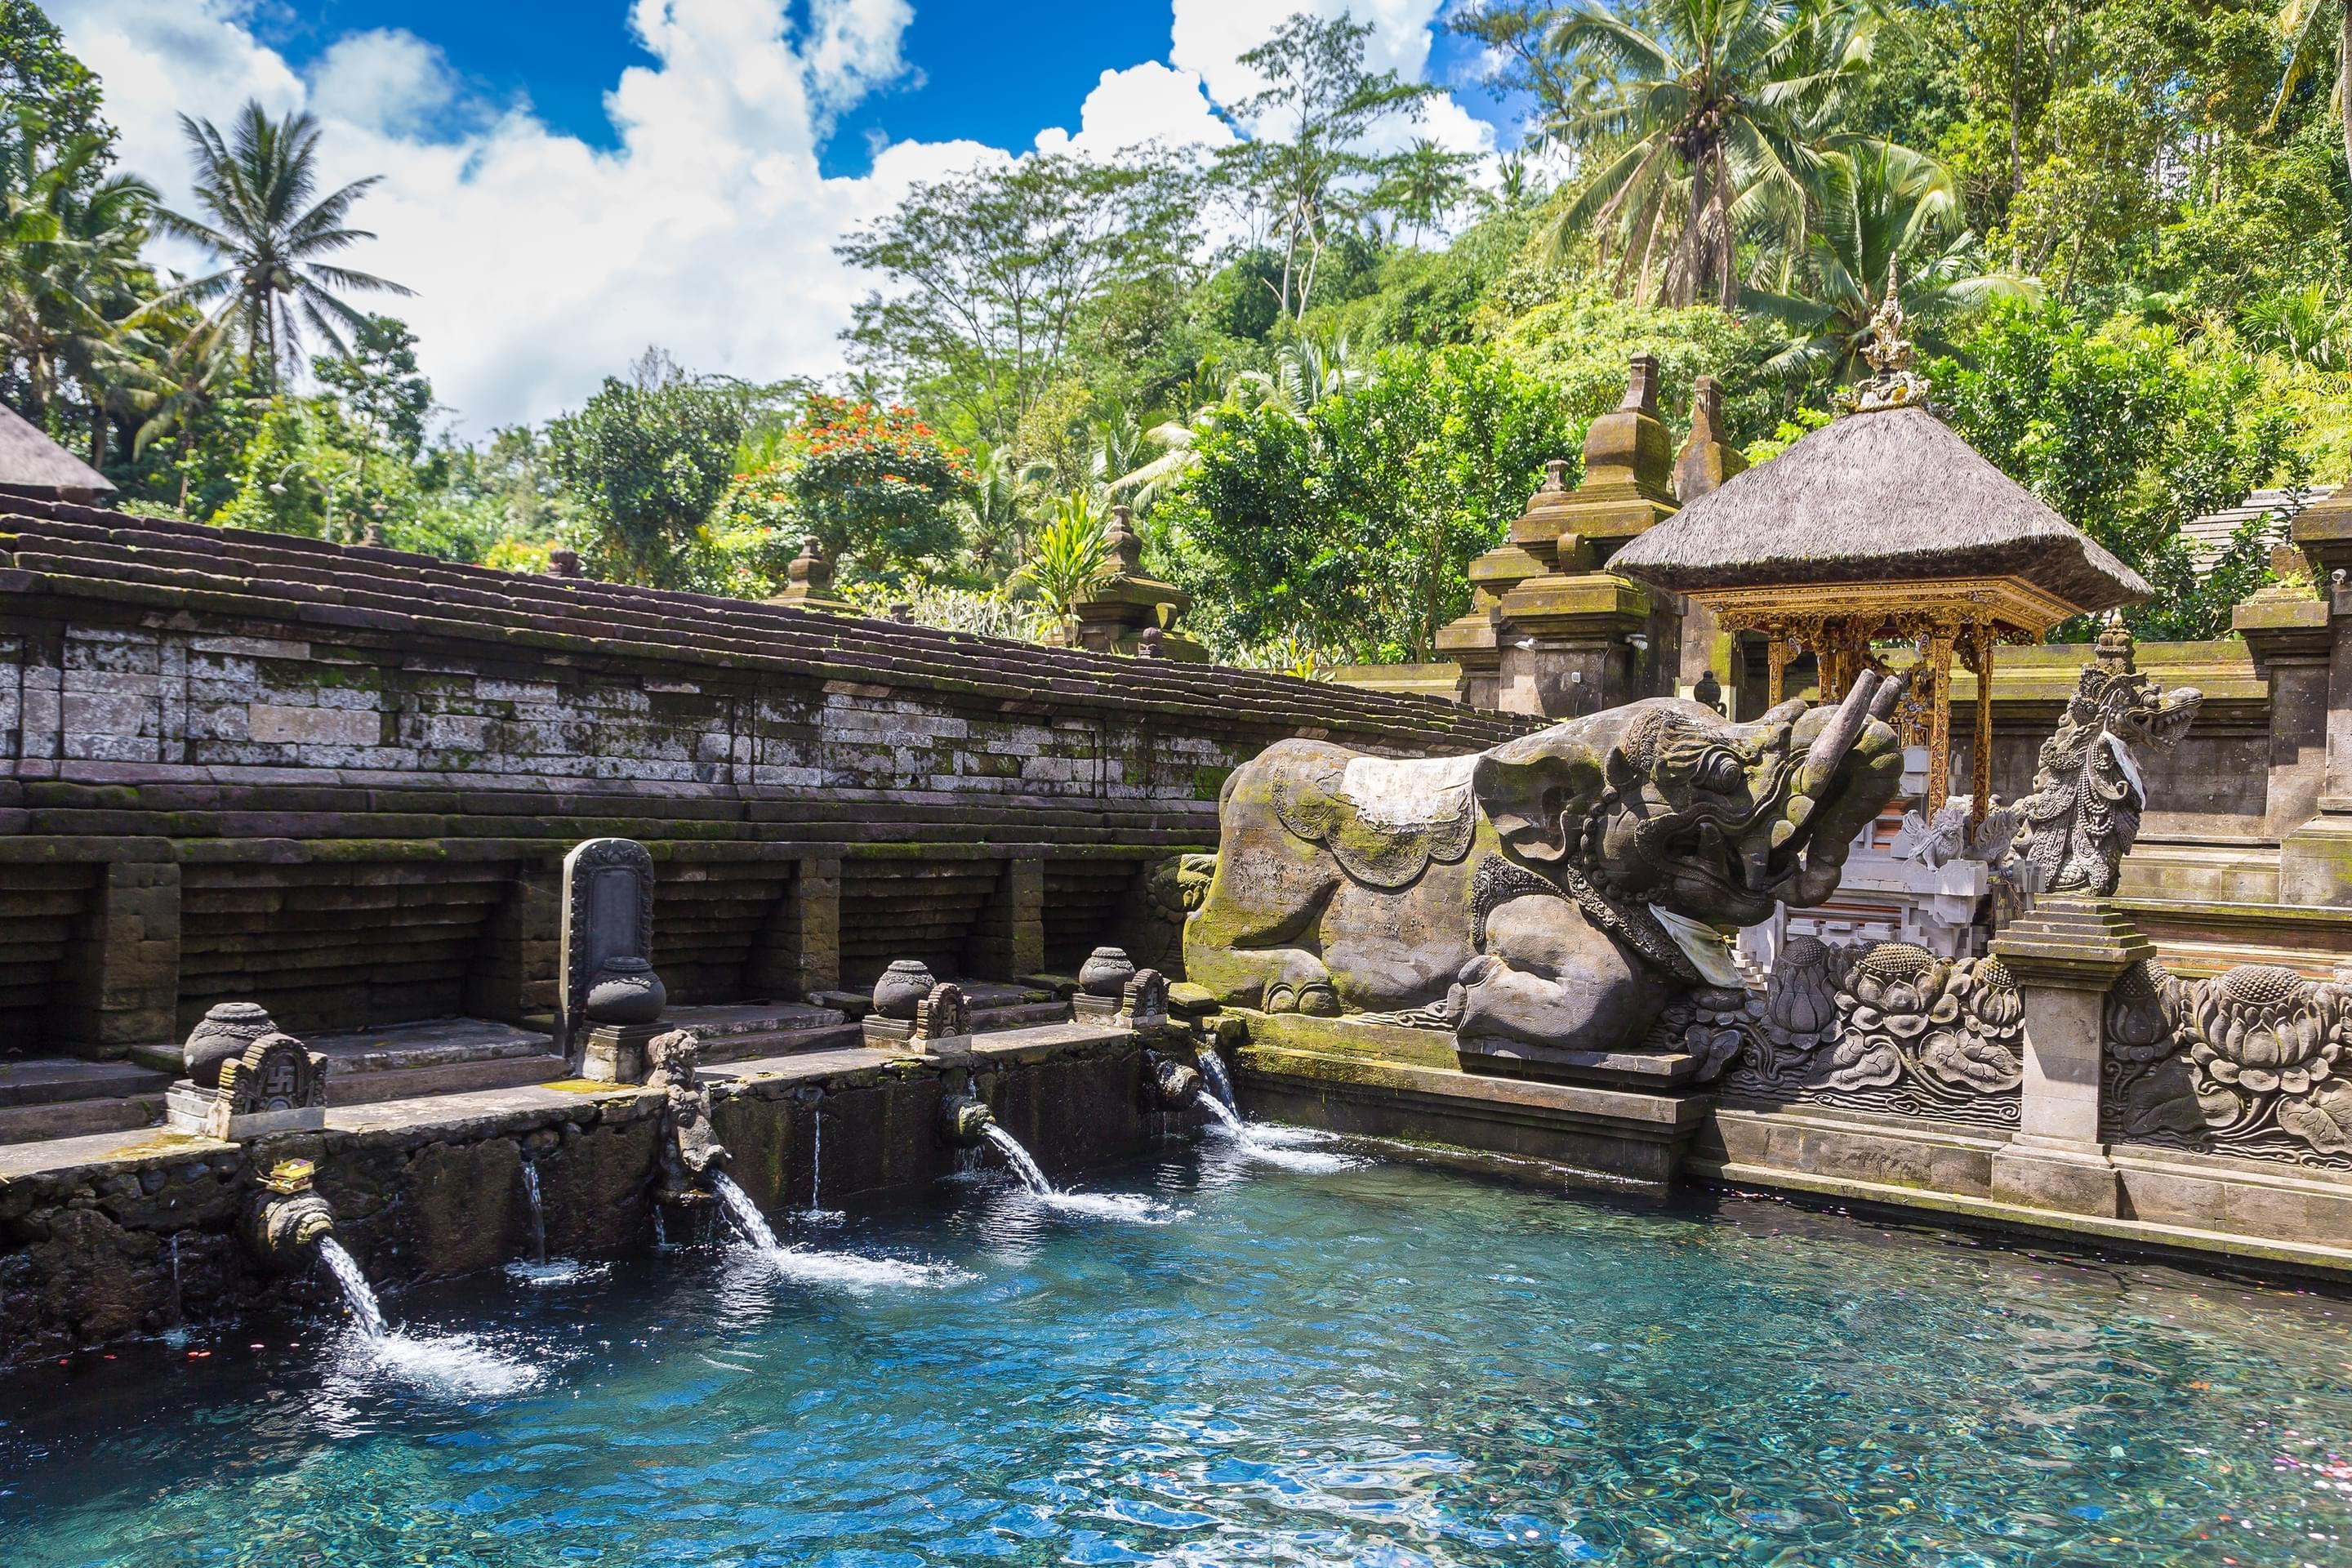 Tirta Empul Temple Overview